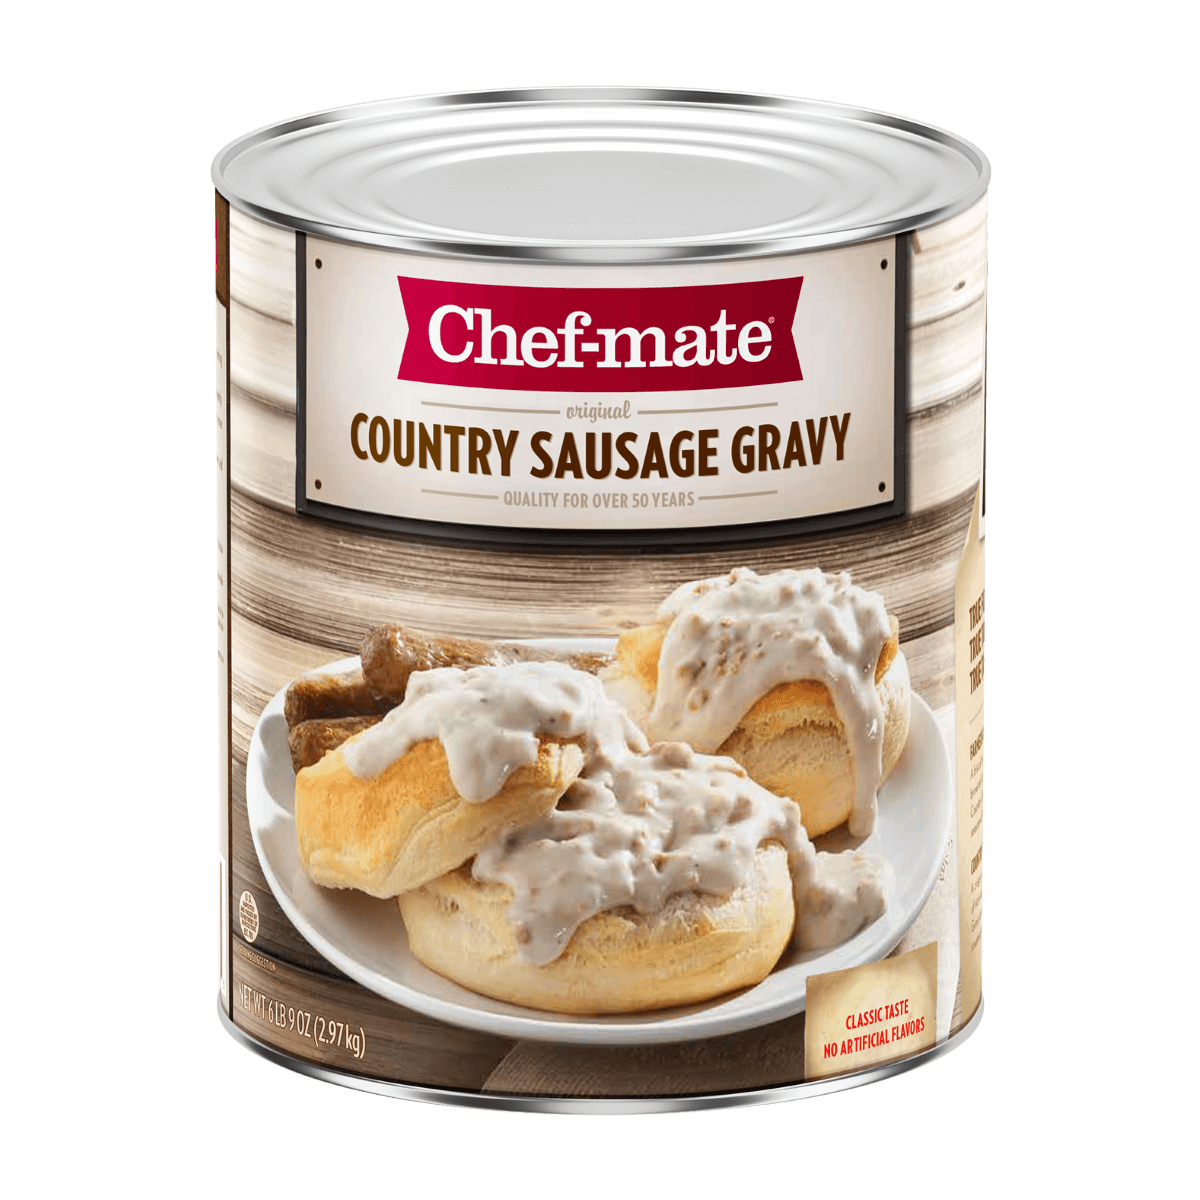 CHEF MATE COUNTRY SAUSAGE GRAVY